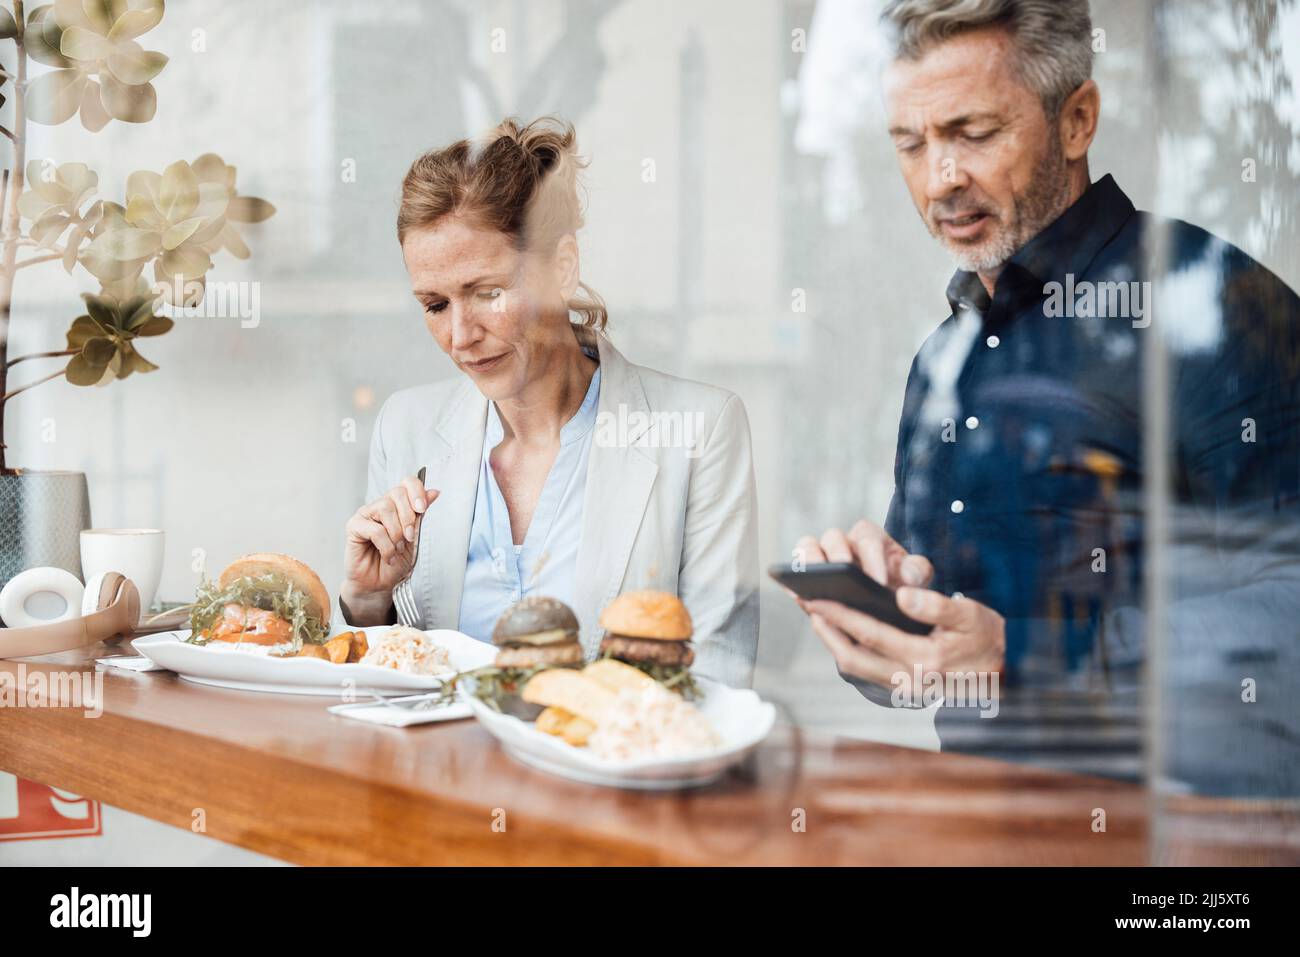 Businesswoman having lunch sitting by businessman using smart phone in cafe seen through glass Stock Photo